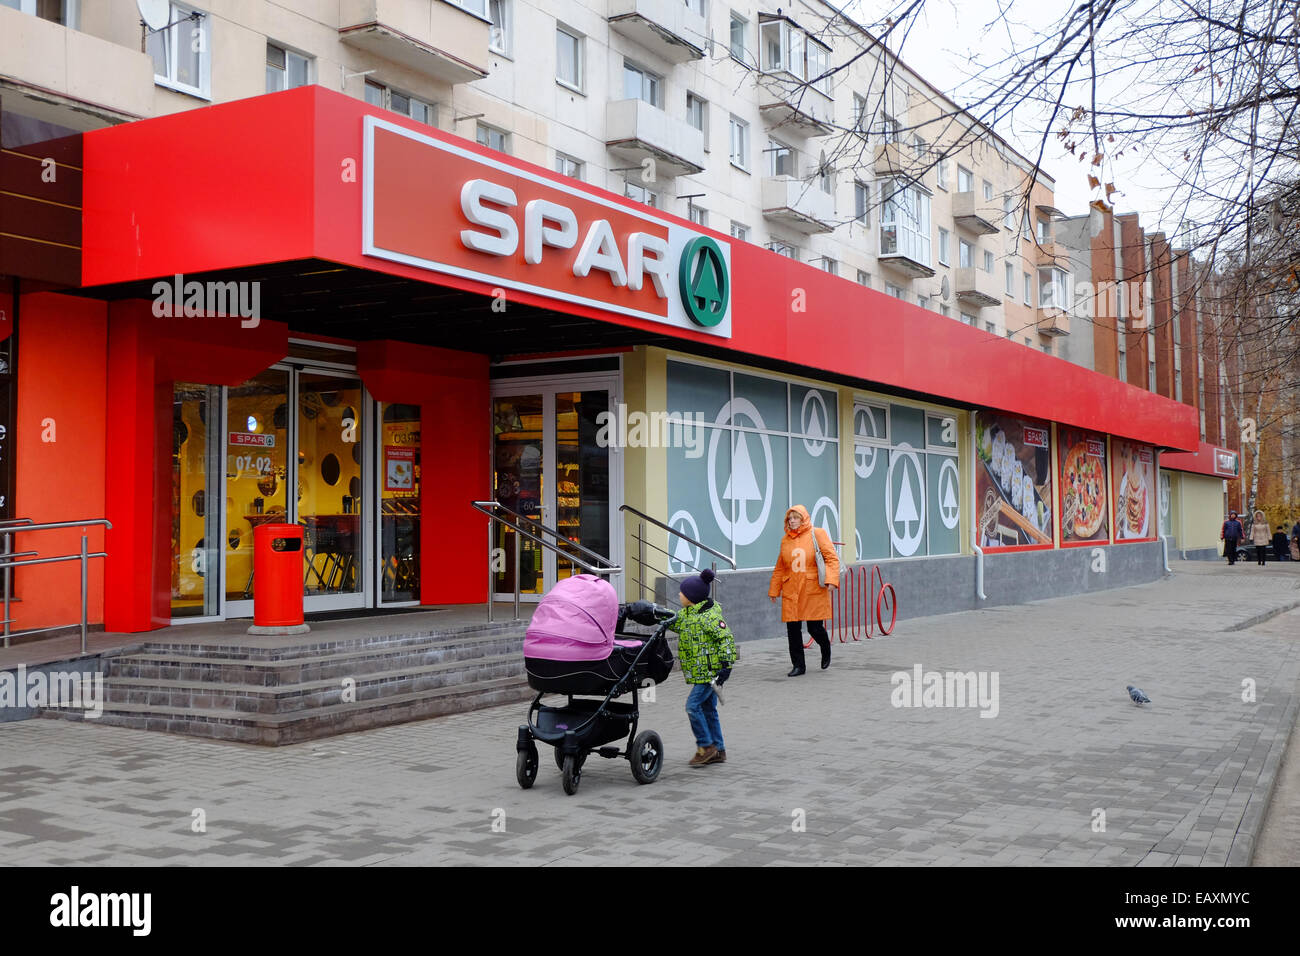 SPAR supermarket on the Kaliningrad street. Spar is an international retail chain and franchise. Stock Photo